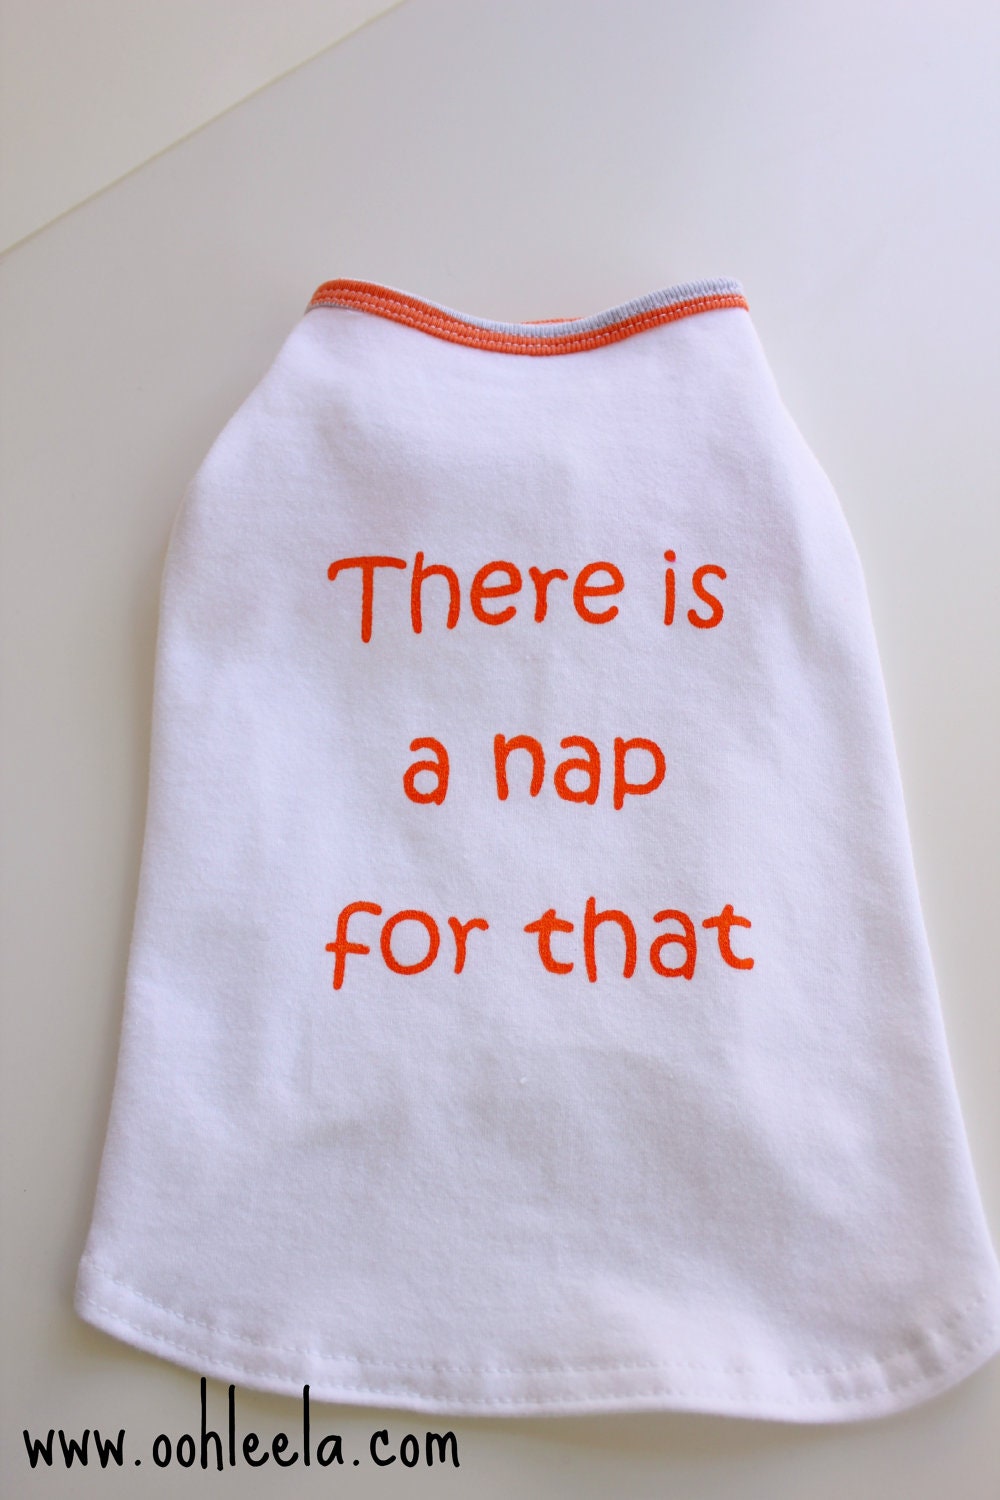 Orange and white dog tank top There is a nap for that - made in the USA by Ooh Leela - LARGE - OohLeelaPets